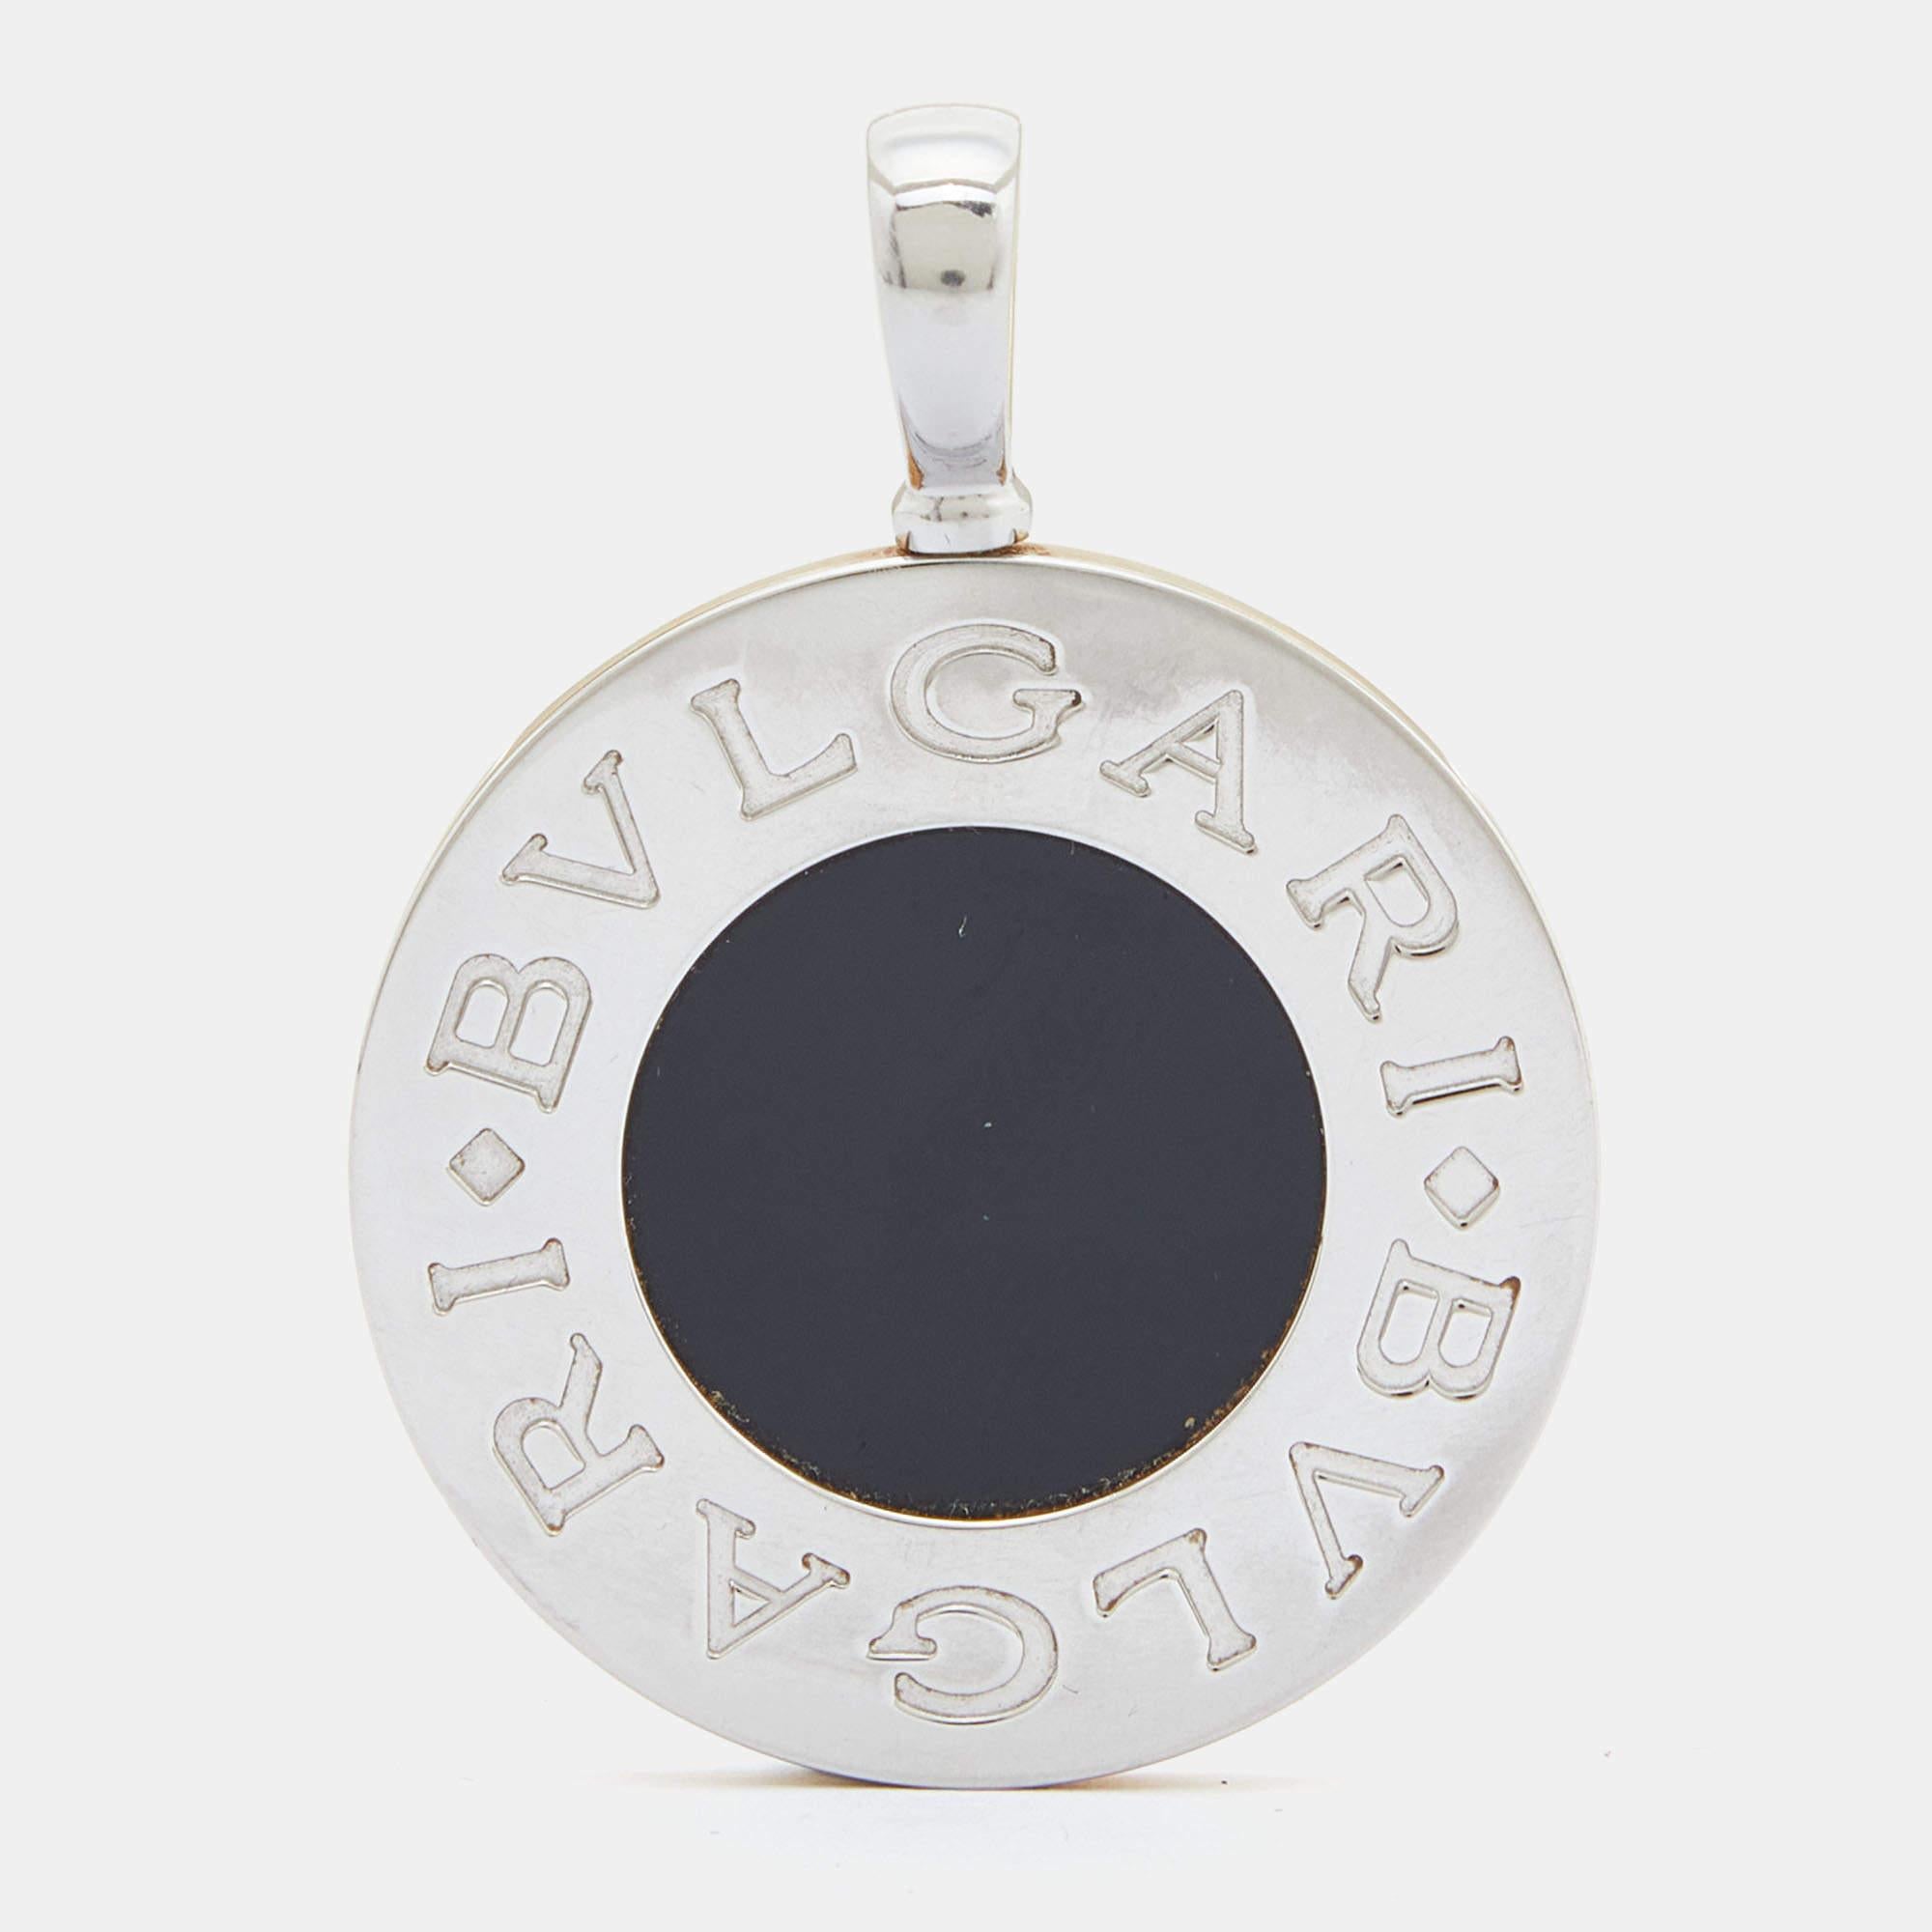 Weighing 18.00 grams, this pendant from Bvlgari is versatile as it comes with a bail that allows you to use it with necklace chains or leather cords. It has been crafted from 18k yellow gold as well as stainless steel and added with onyx.

